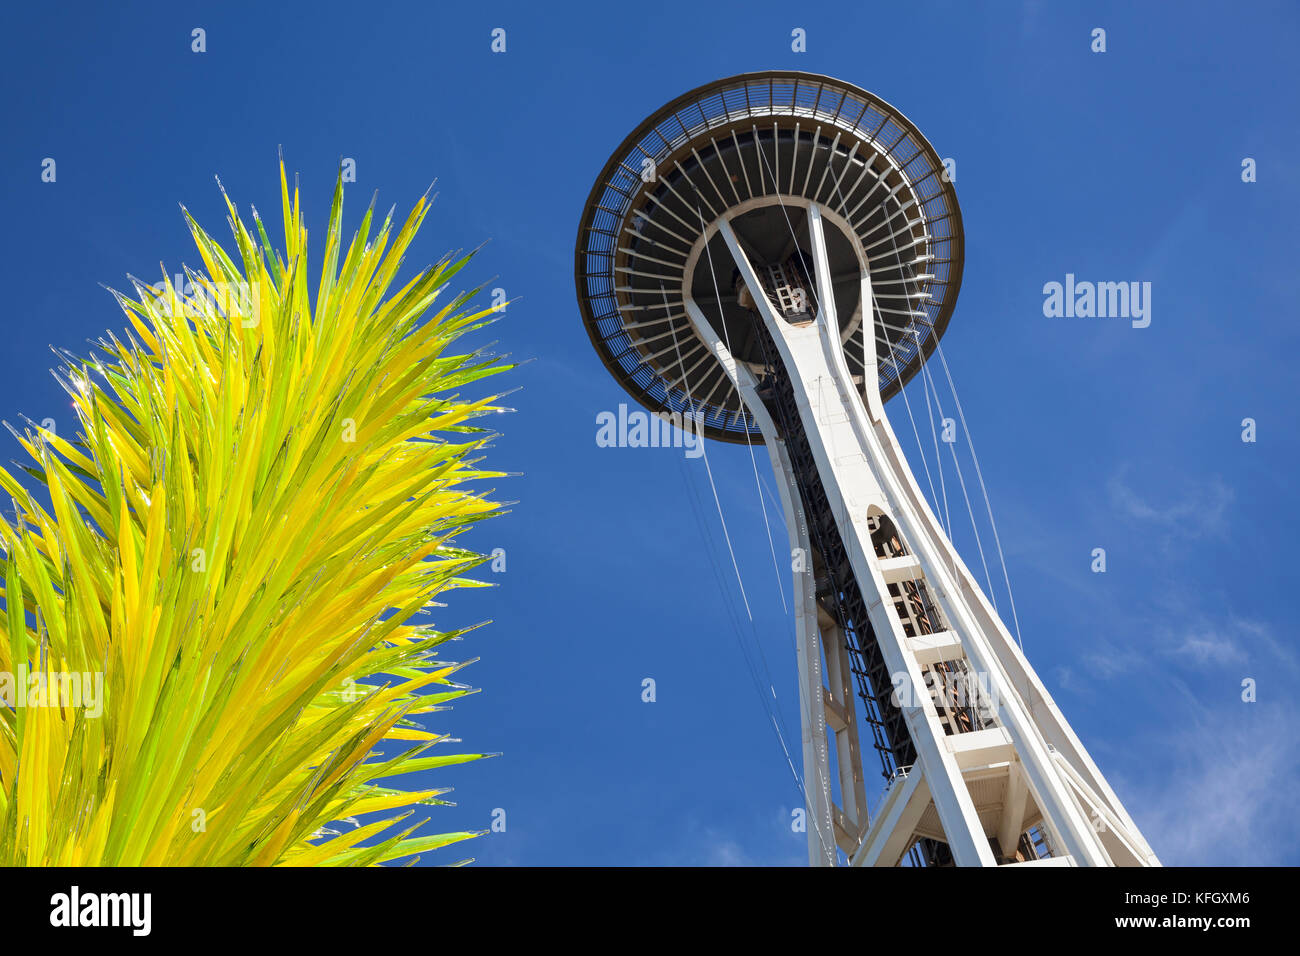 WA14115-00...WASHINGTON - Glass sculpture and Space Needle at the Chihuly Garden And Glass in the Seattle Center. Stock Photo